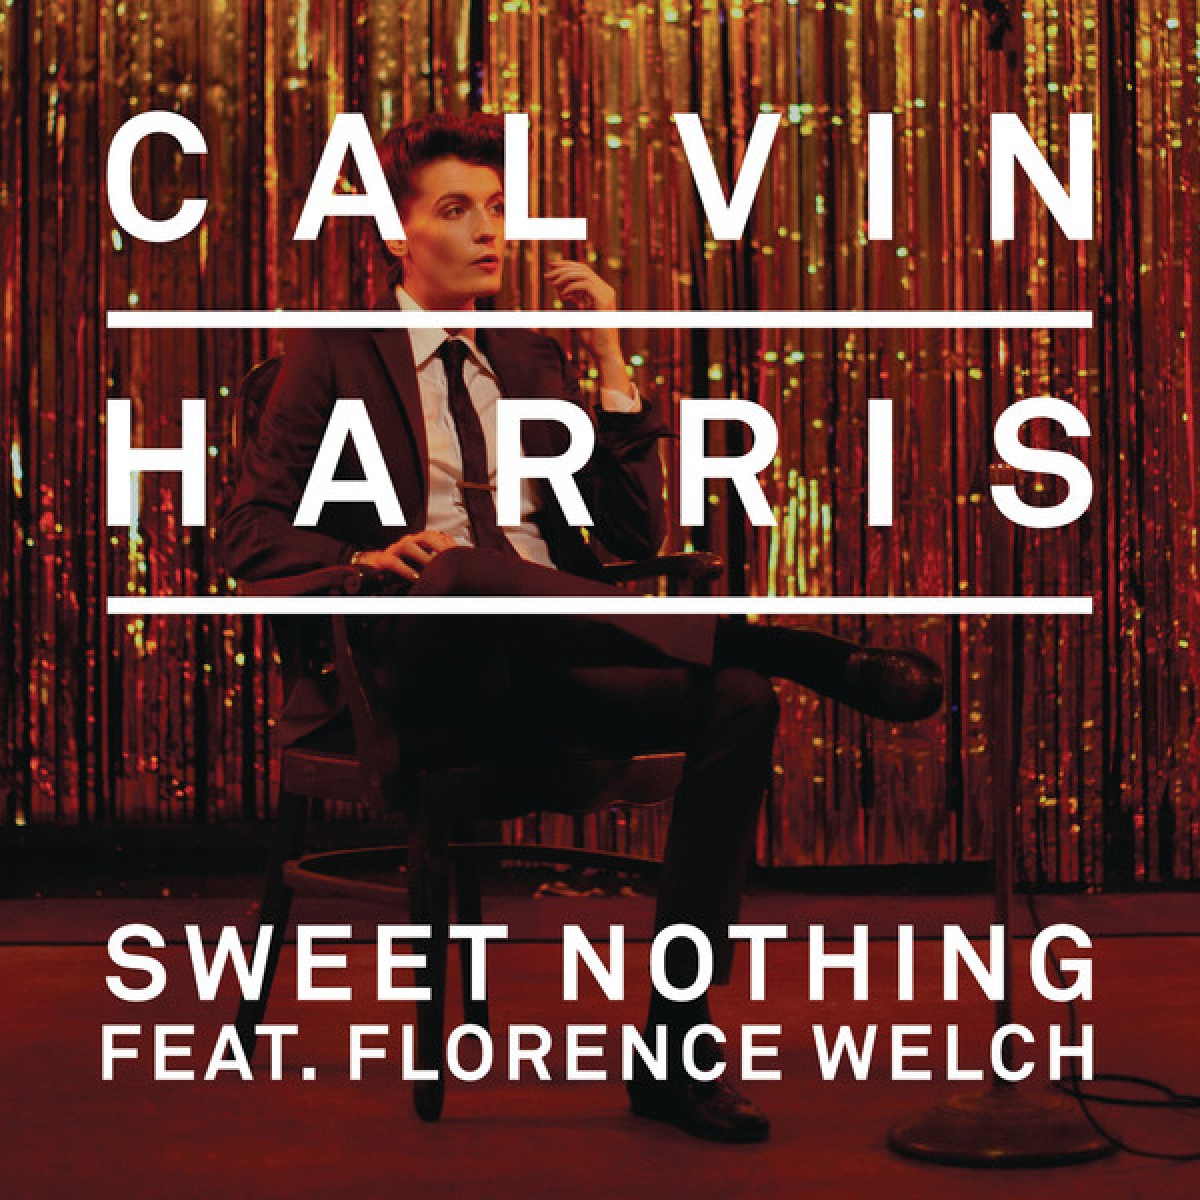 CALVIN HARRIS - Sweet Nothing (feat. Florence Welch)